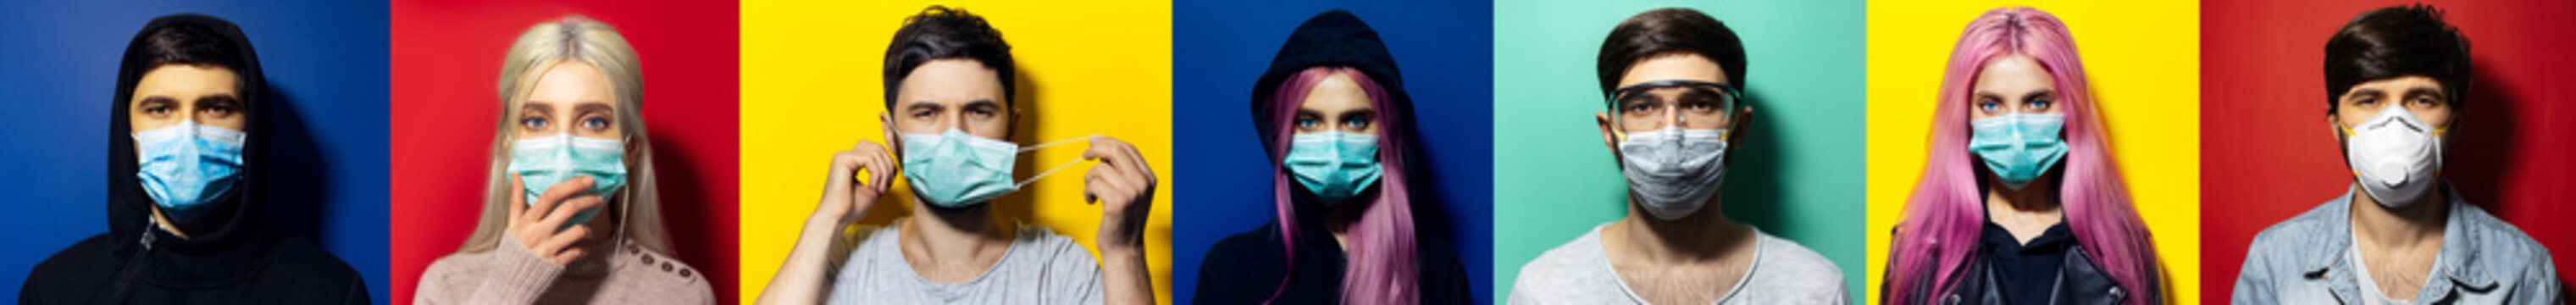 Collage of diverse portraits on colored backgrounds, girl and guy wearing medical flu mask on face, coronavirus prevention.